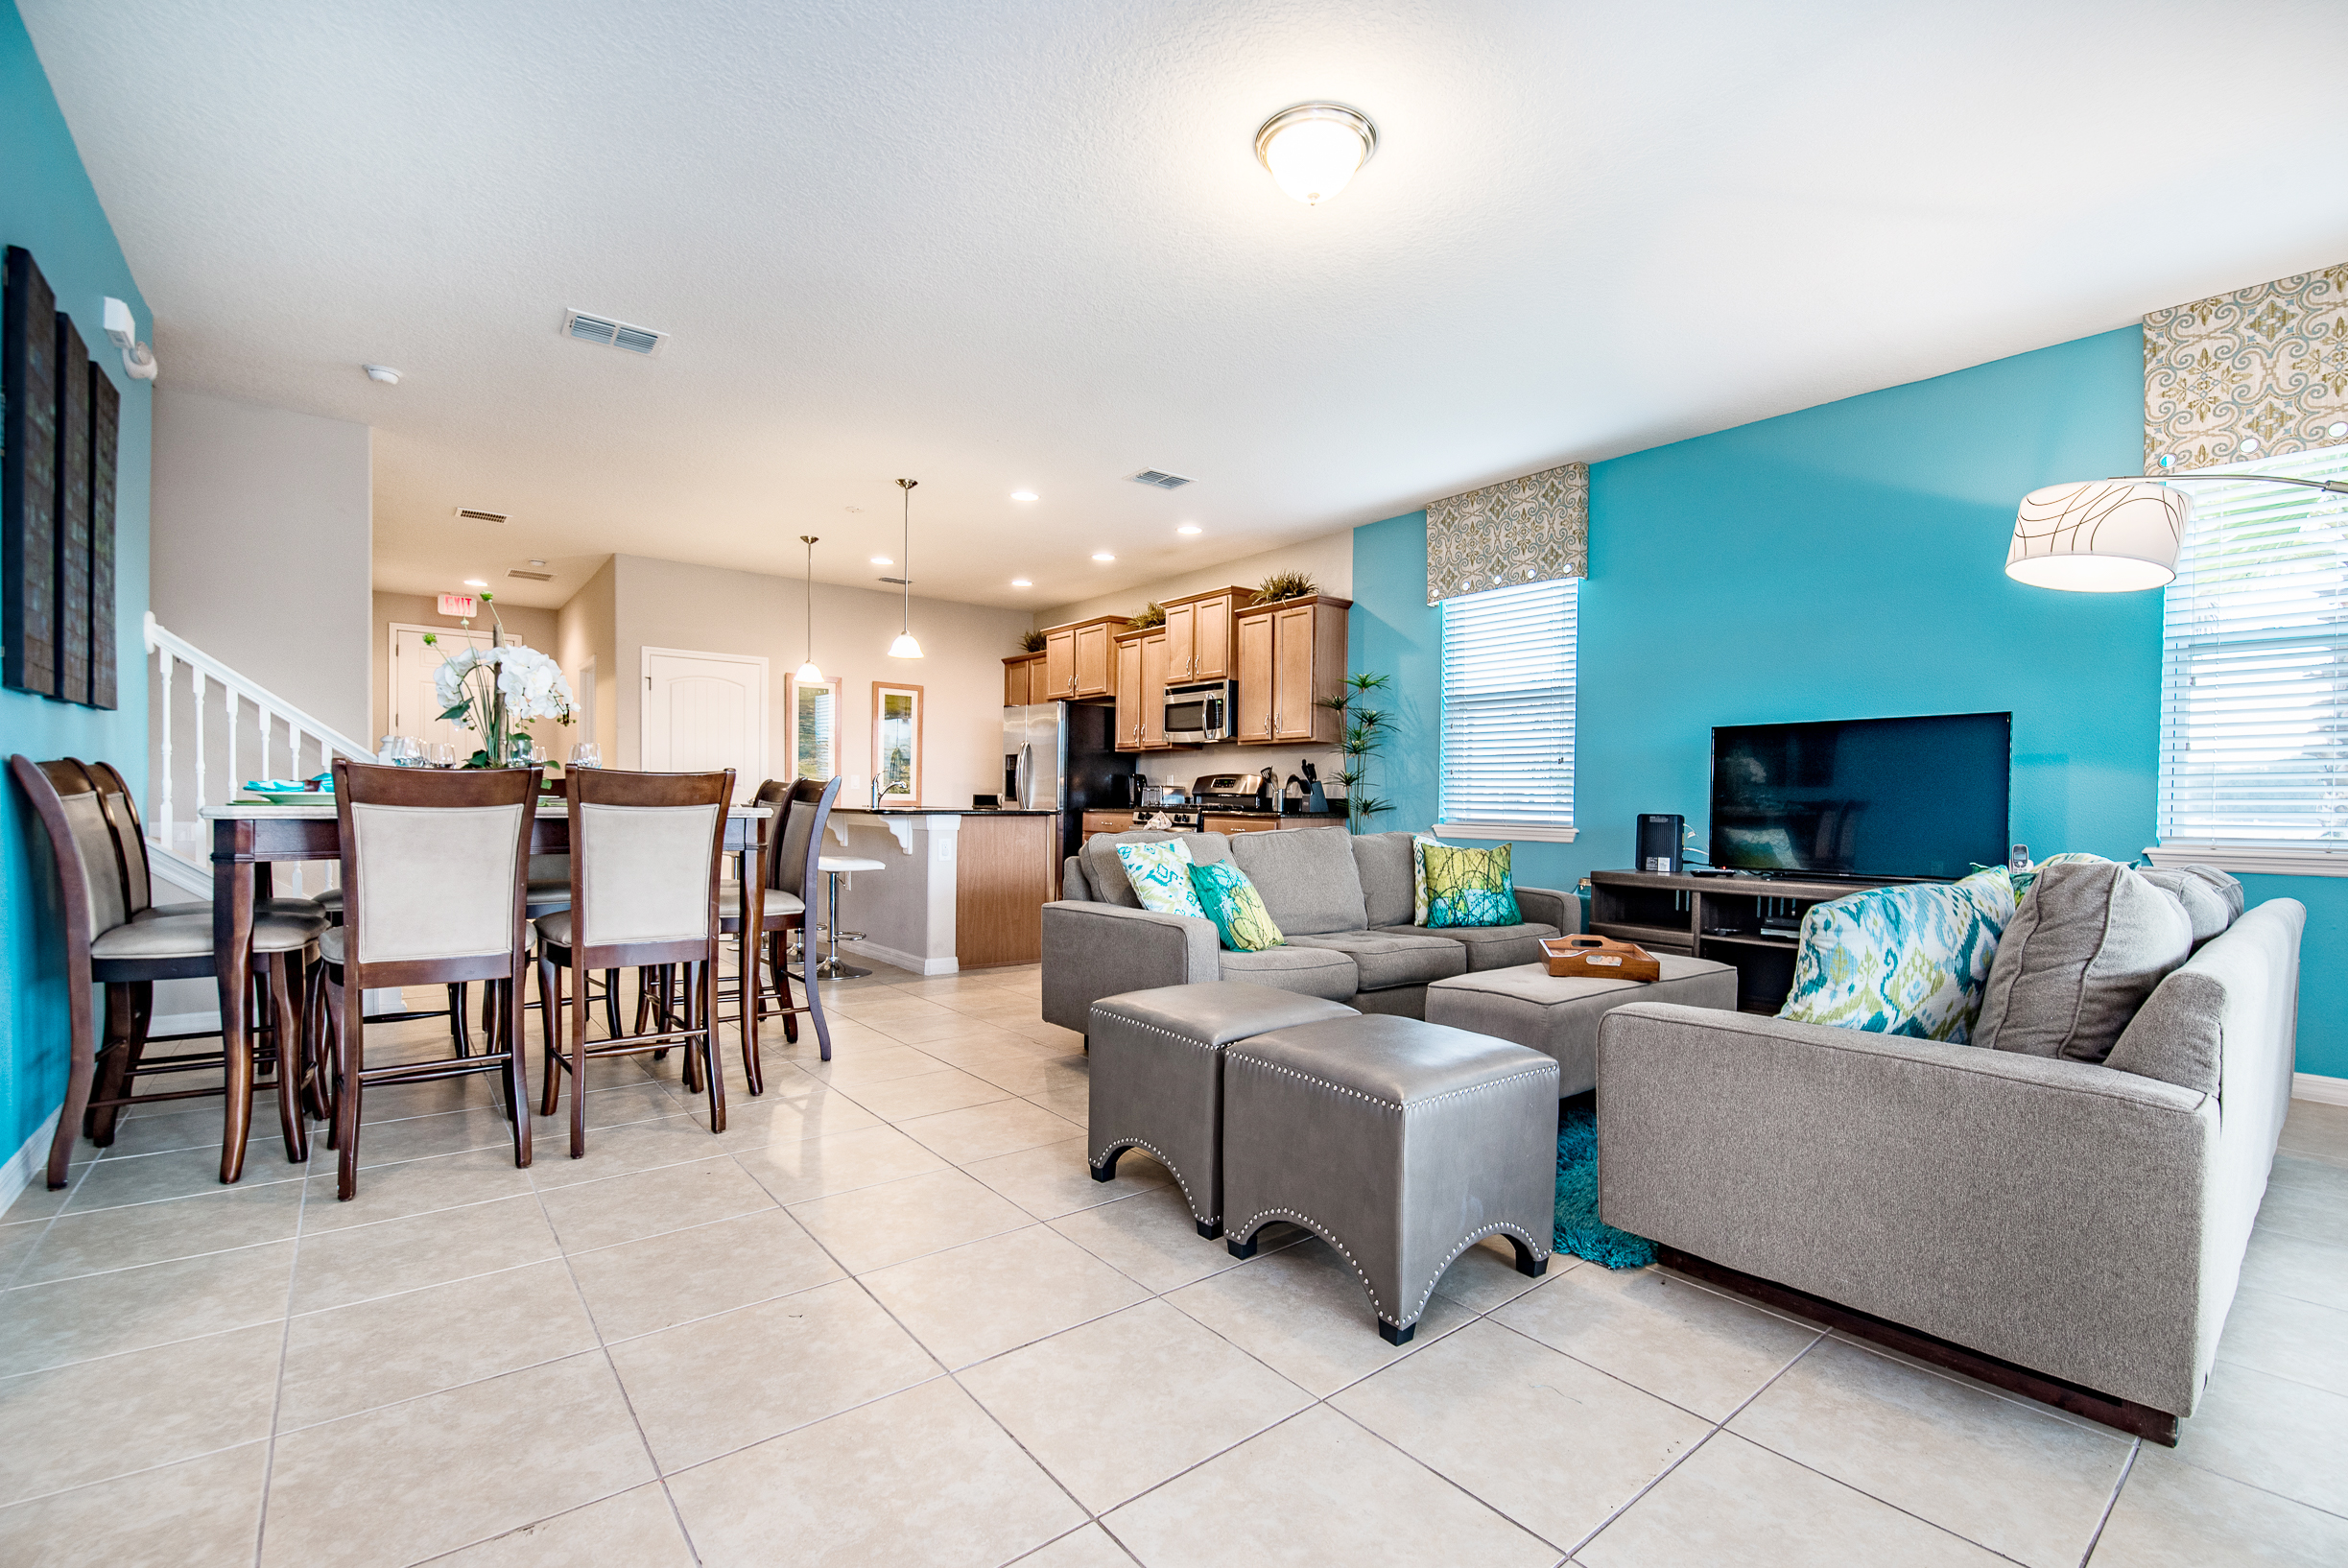 Beautiful townhouse in Davenport Florida - Open-concept living area seamlessly connected to a stylish dining space and kitchen - Harmonious color scheme with pops of accent colors for visual interest - Thoughtful mix of textures